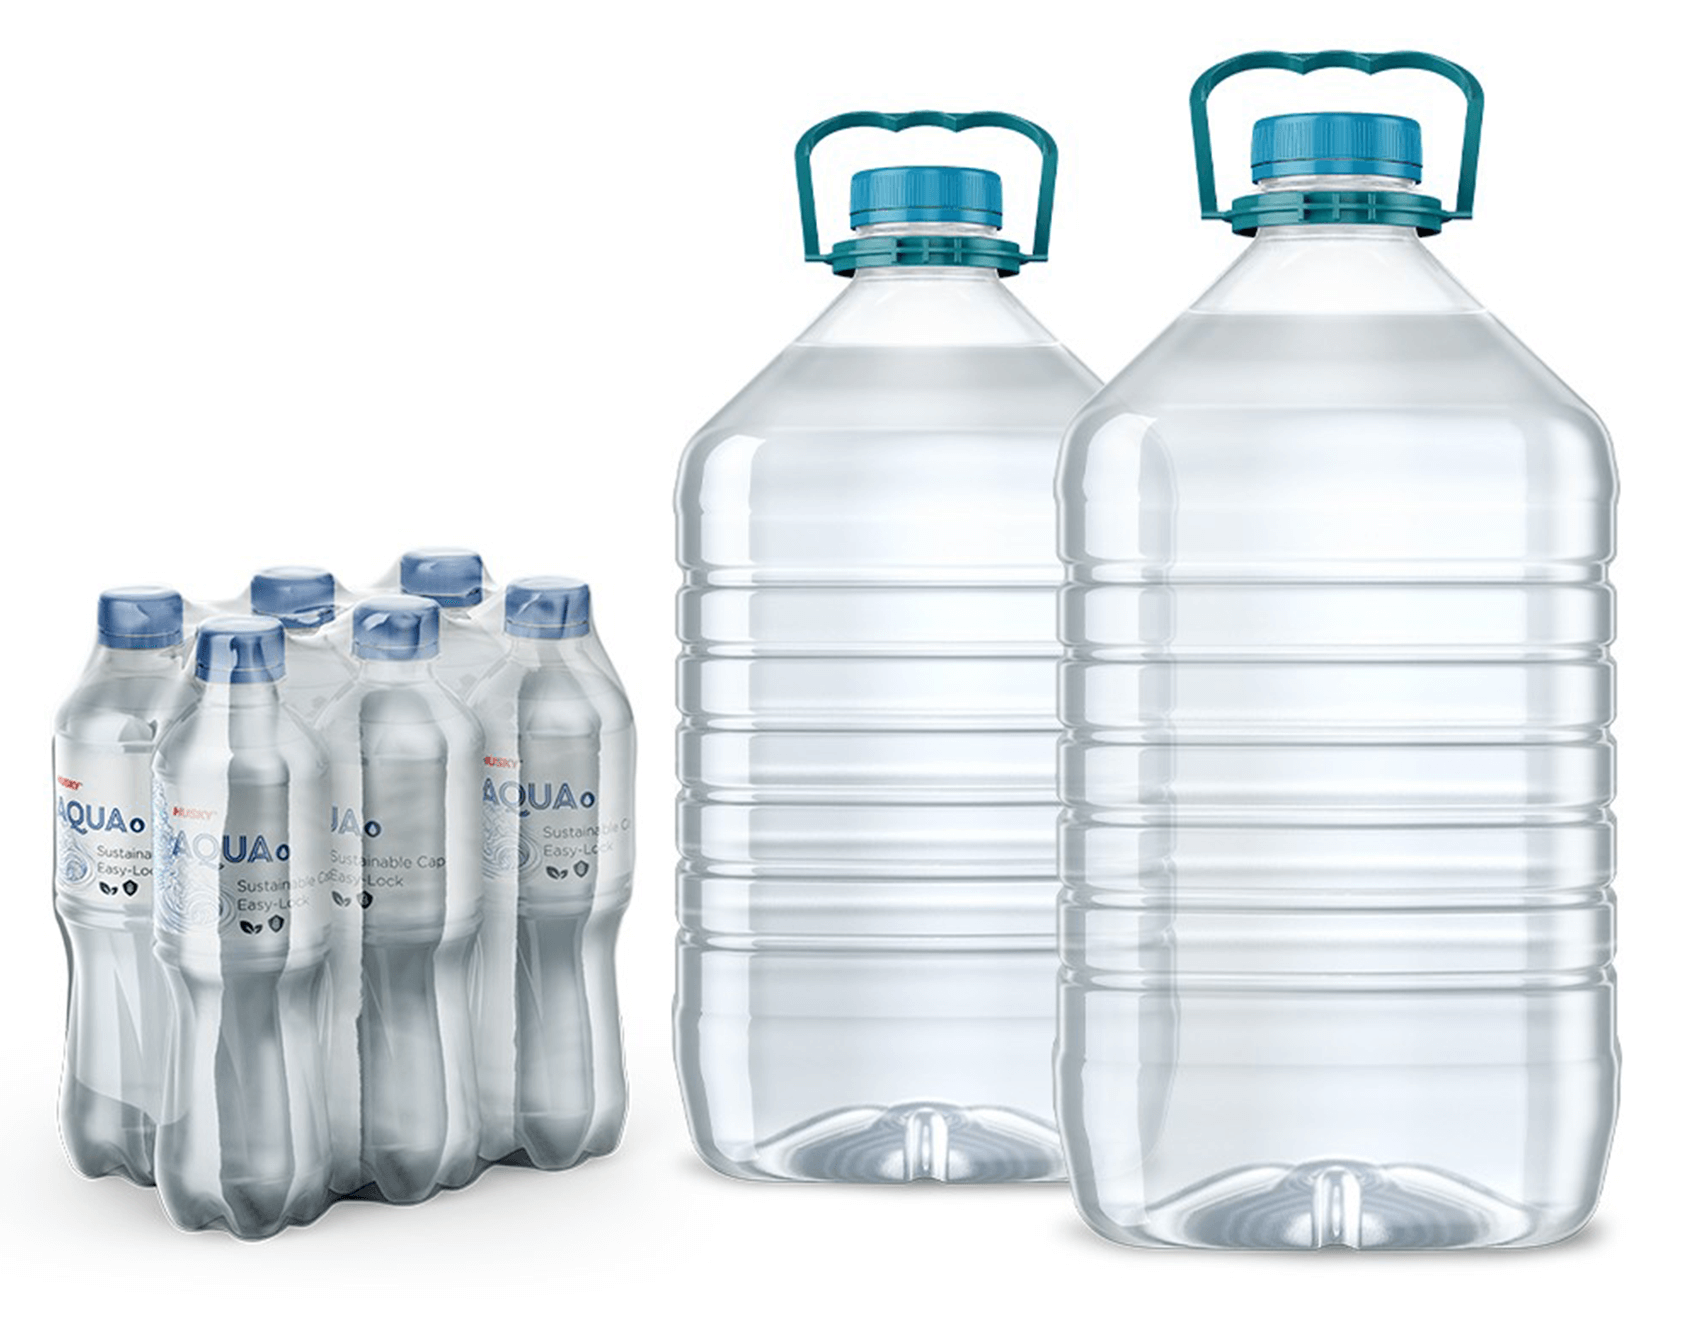 Beverage containers used to ship from ecommerce stores